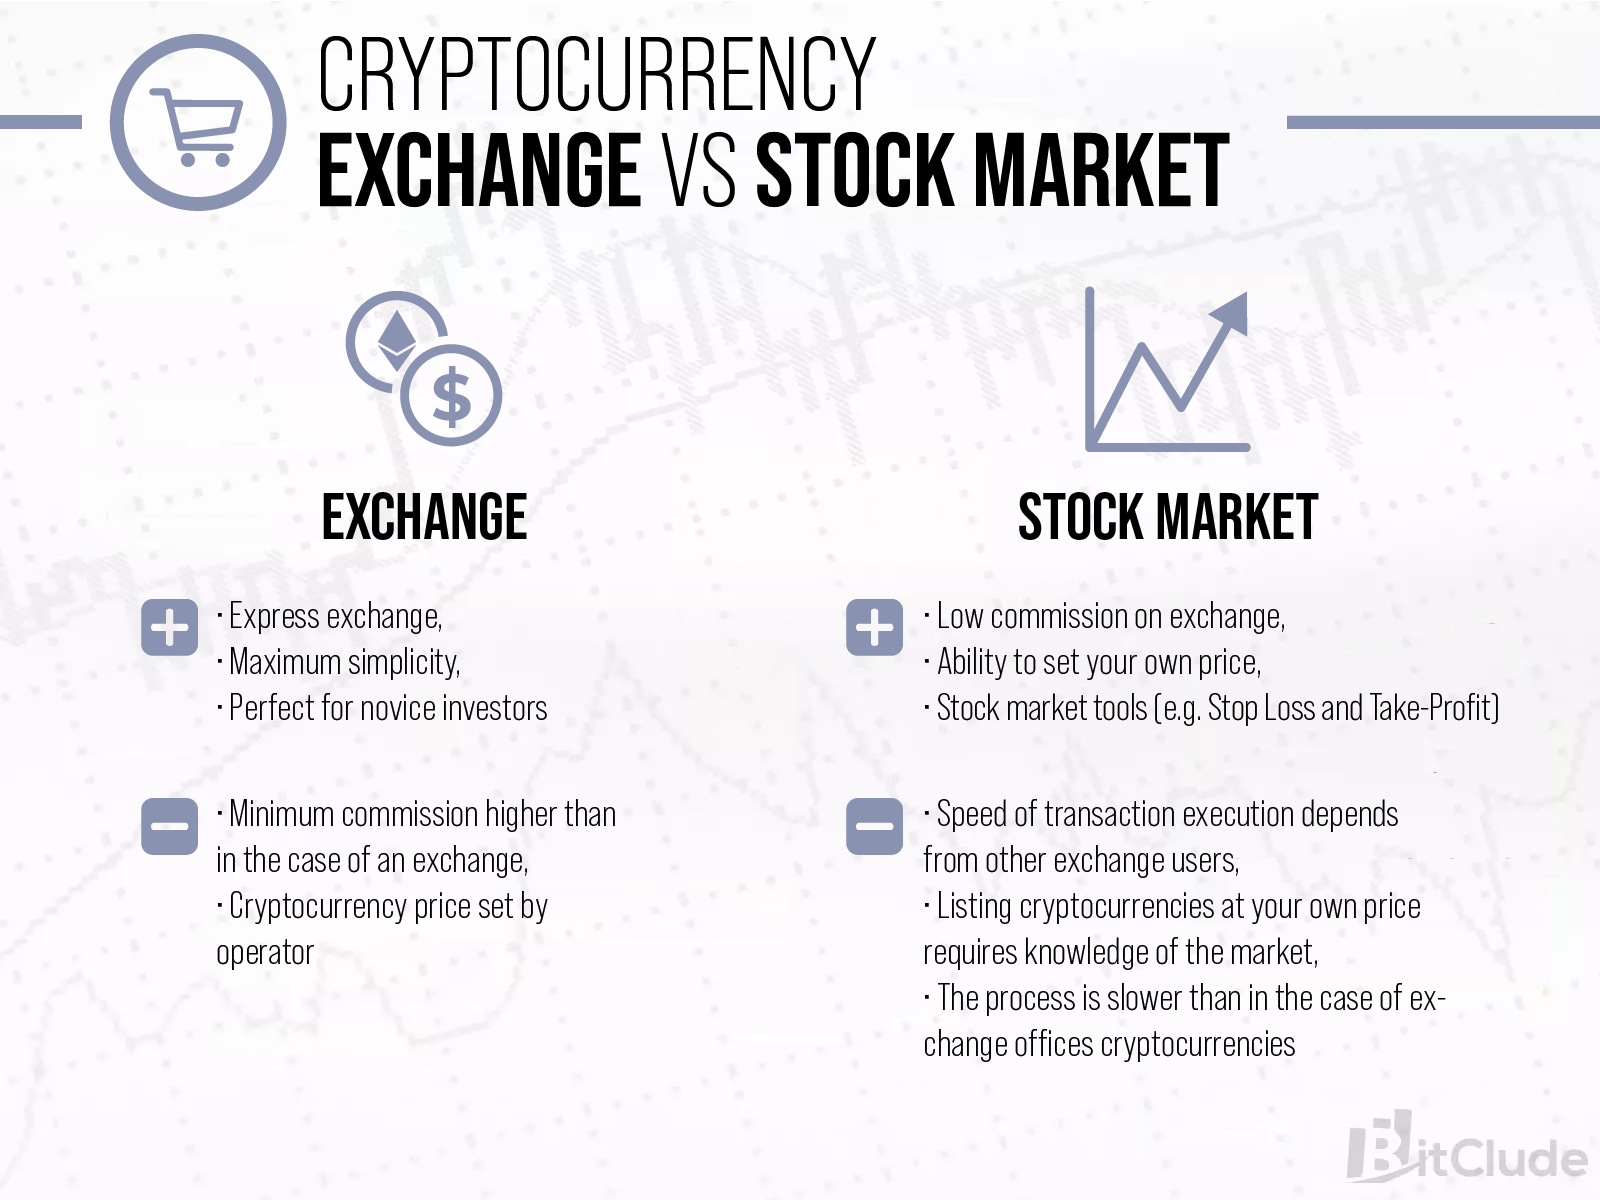 Comparison of the stock exchange and cryptocurrency exchange. Express exchange and maximum simplicity are the most important advantages of an exchange office. The cryptocurrency exchange requires more sophistication, but also offers lower commissions.